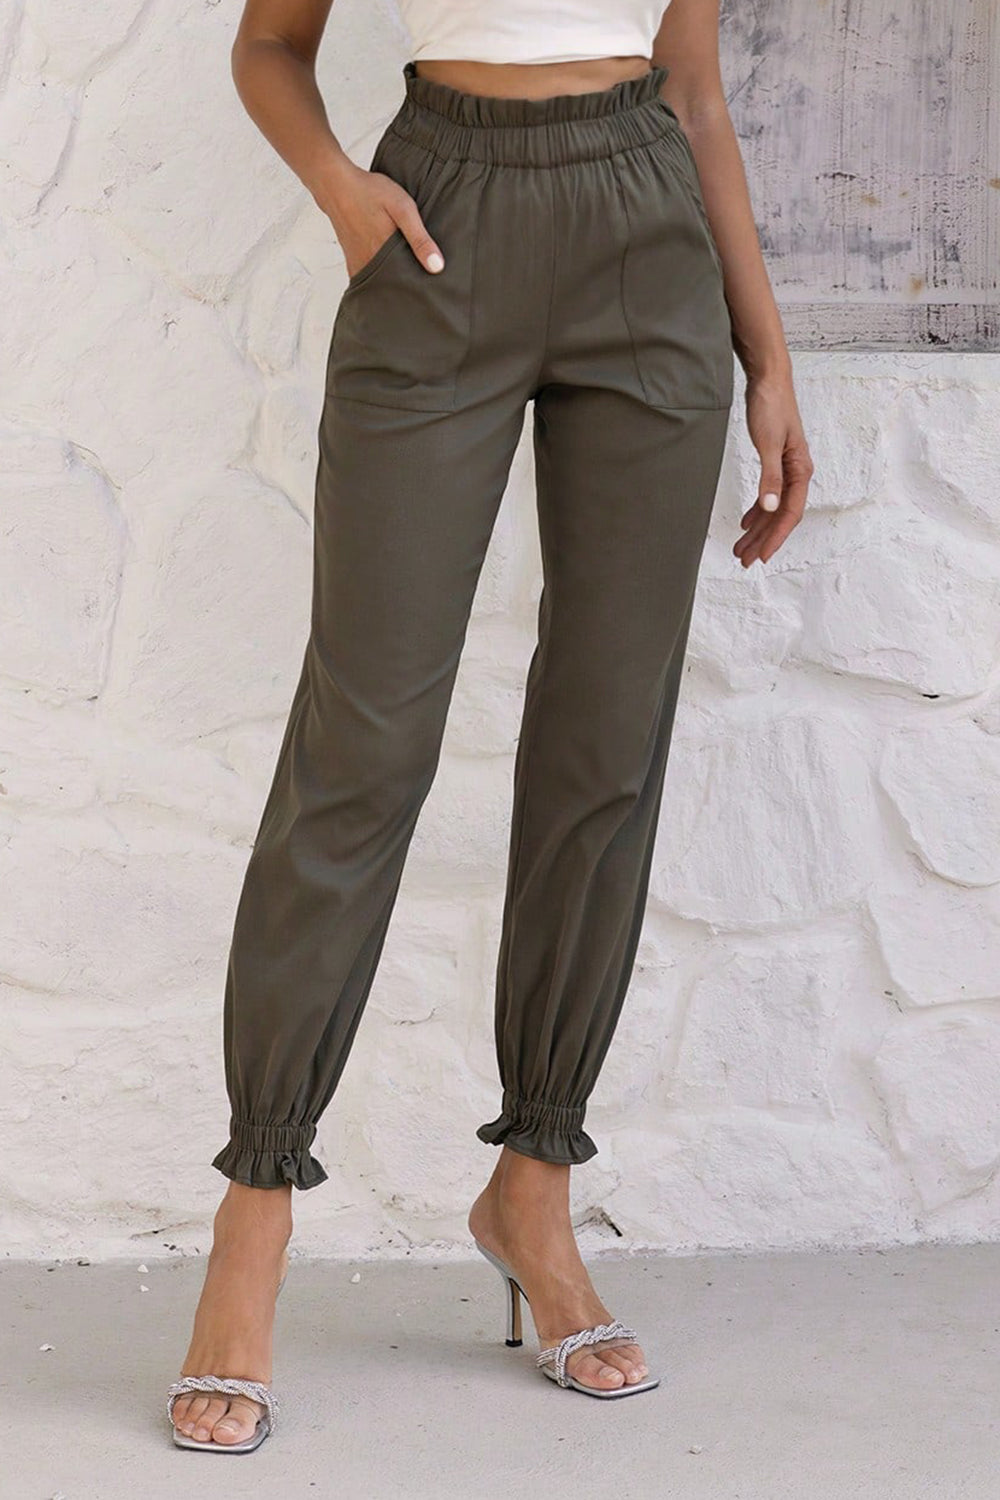 Paperbag Waist Pants with Pockets  Krazy Heart Designs Boutique   